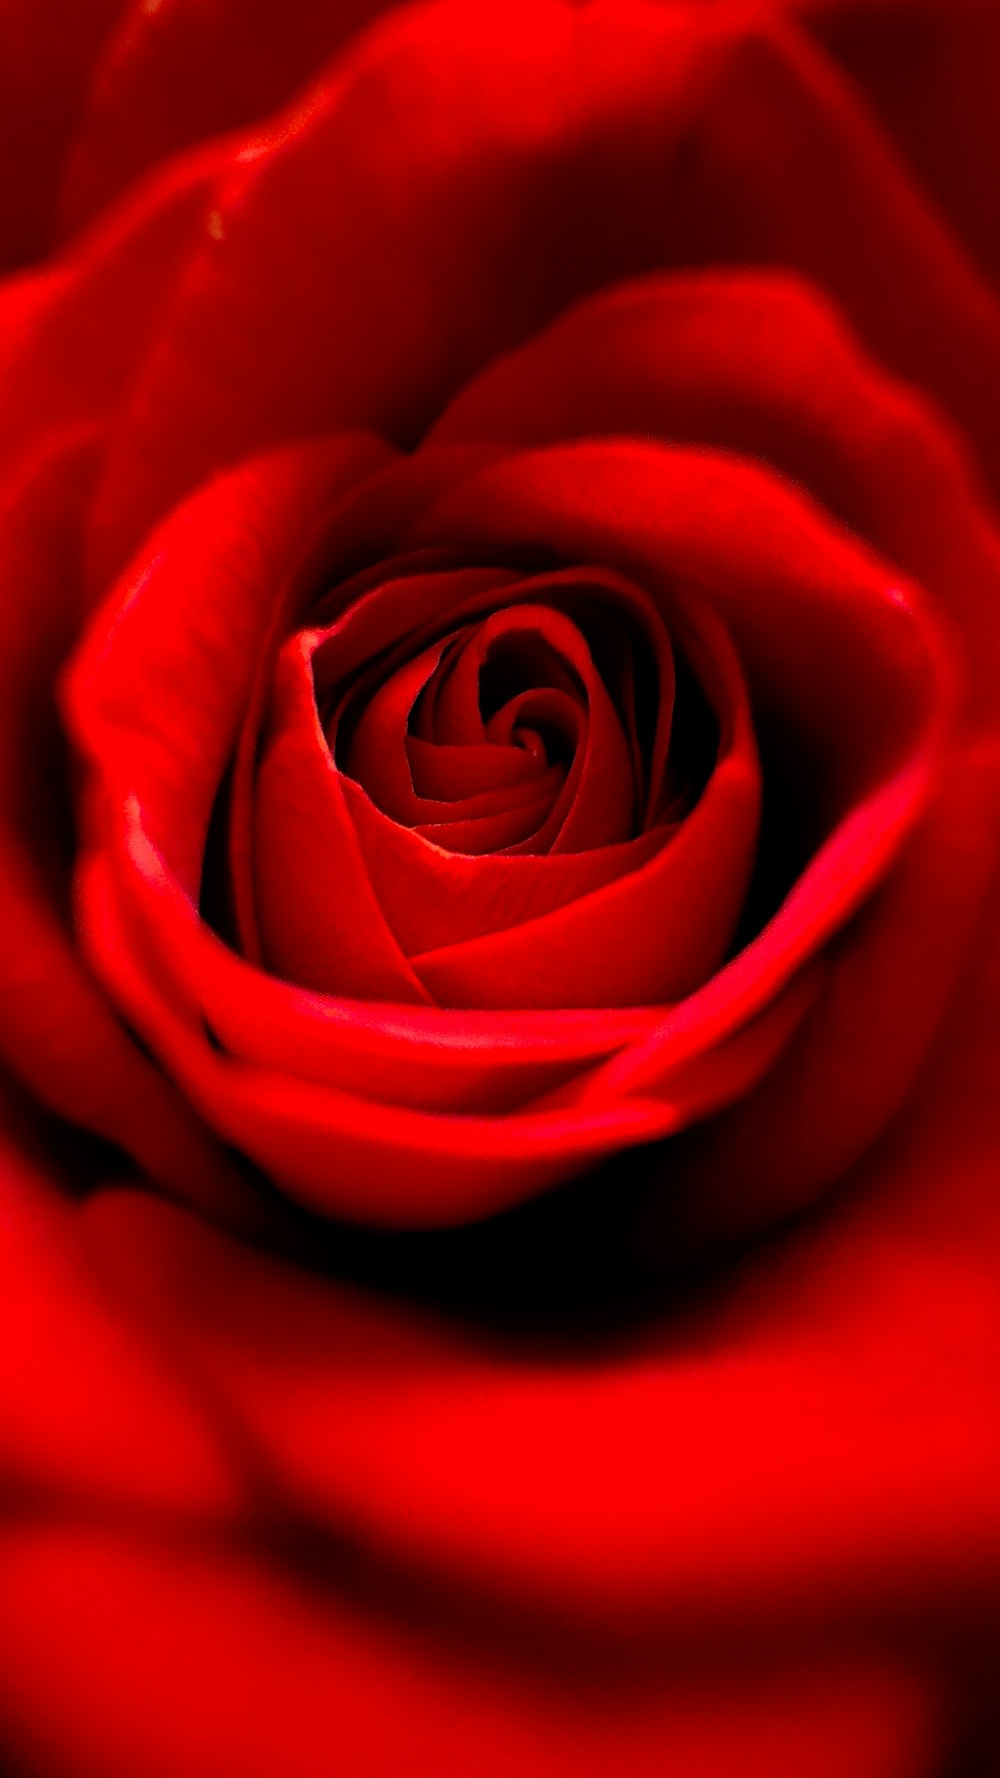 a close up of a red rose flower